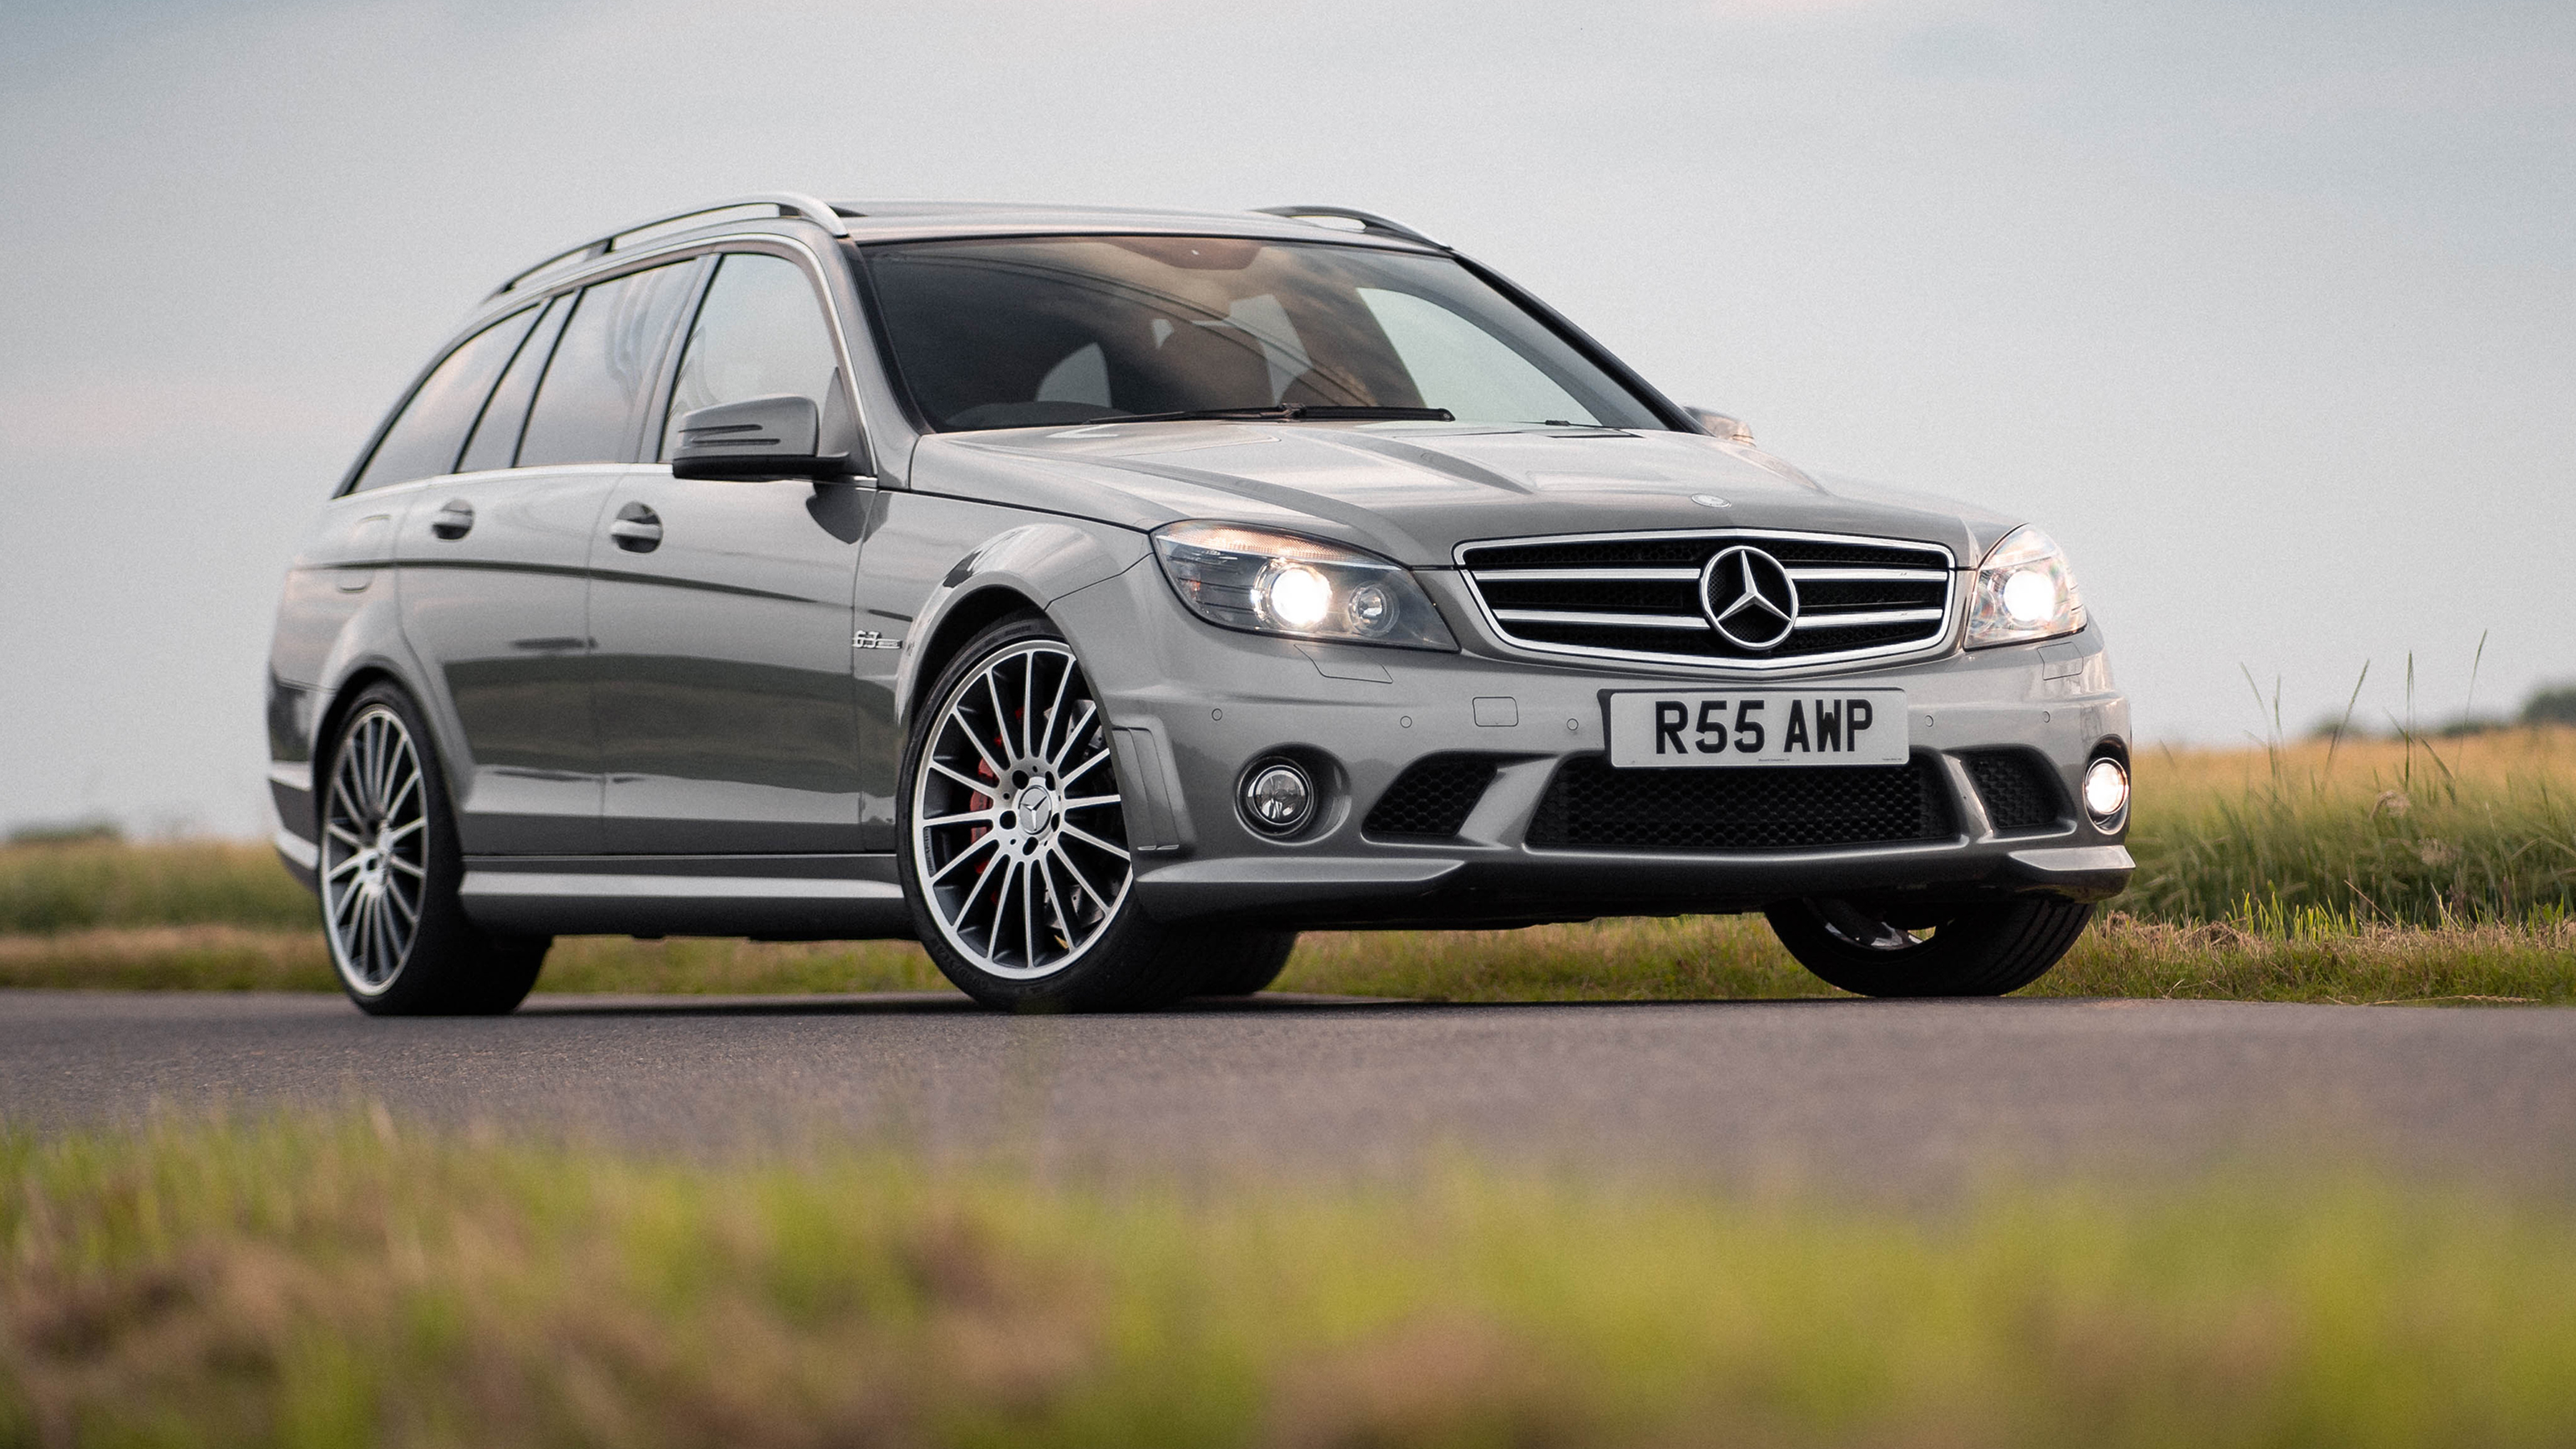 Mercedes-Benz C63 AMG (W204, 2008-2014) – pictures